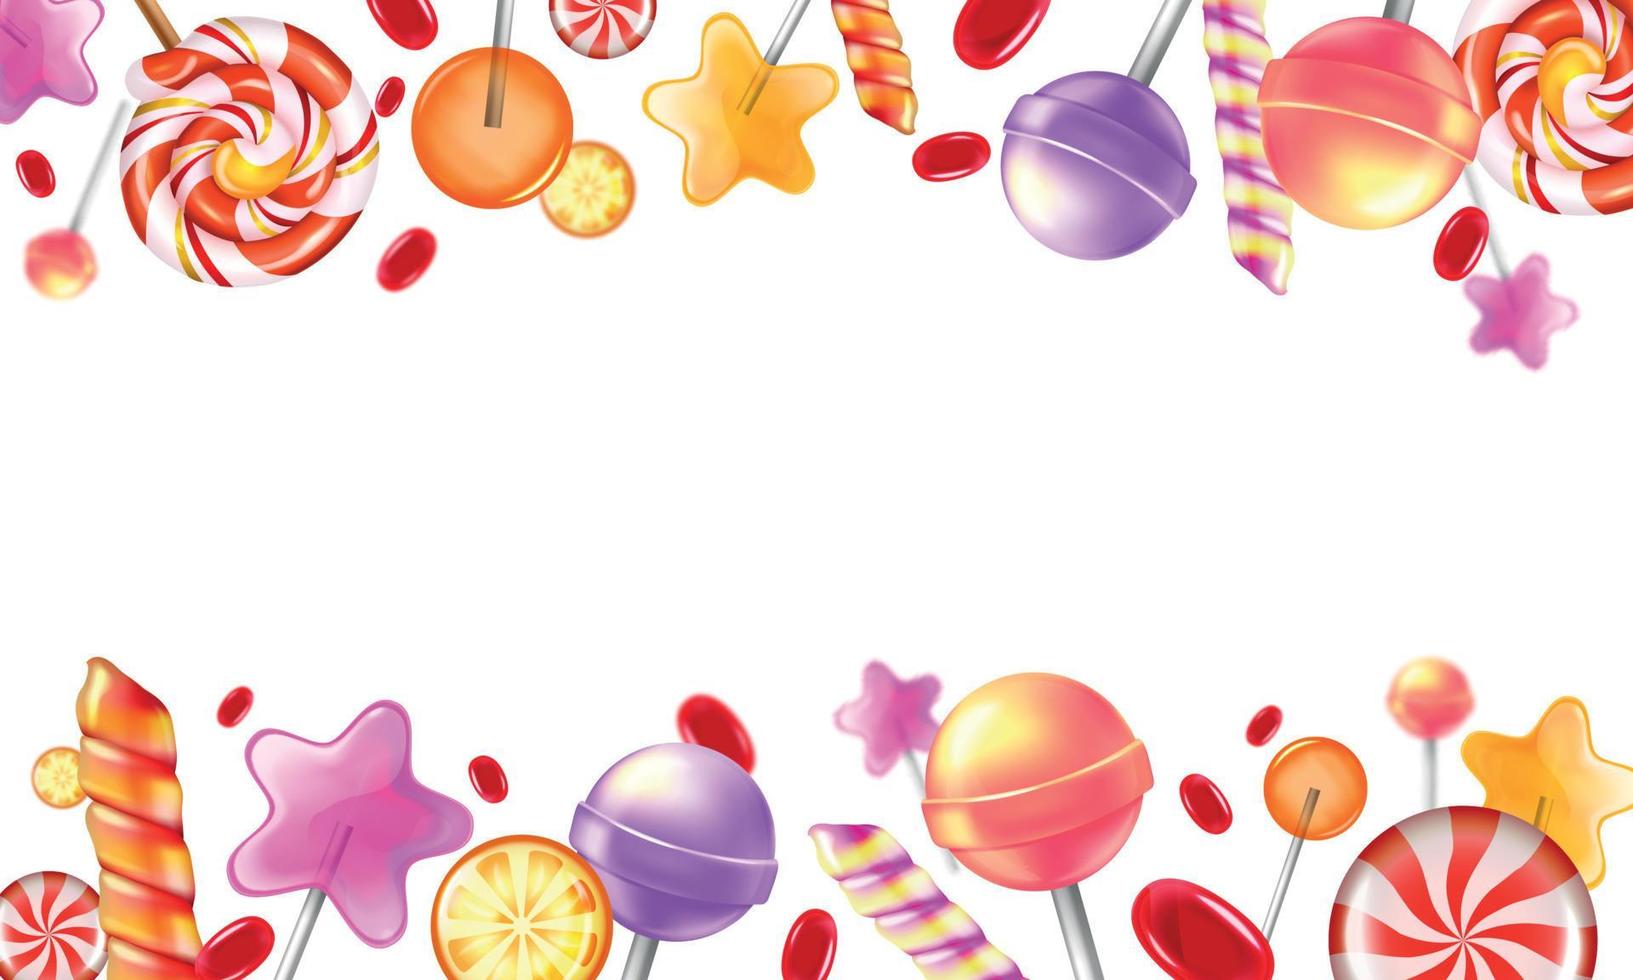 Realistic Sweets Background vector